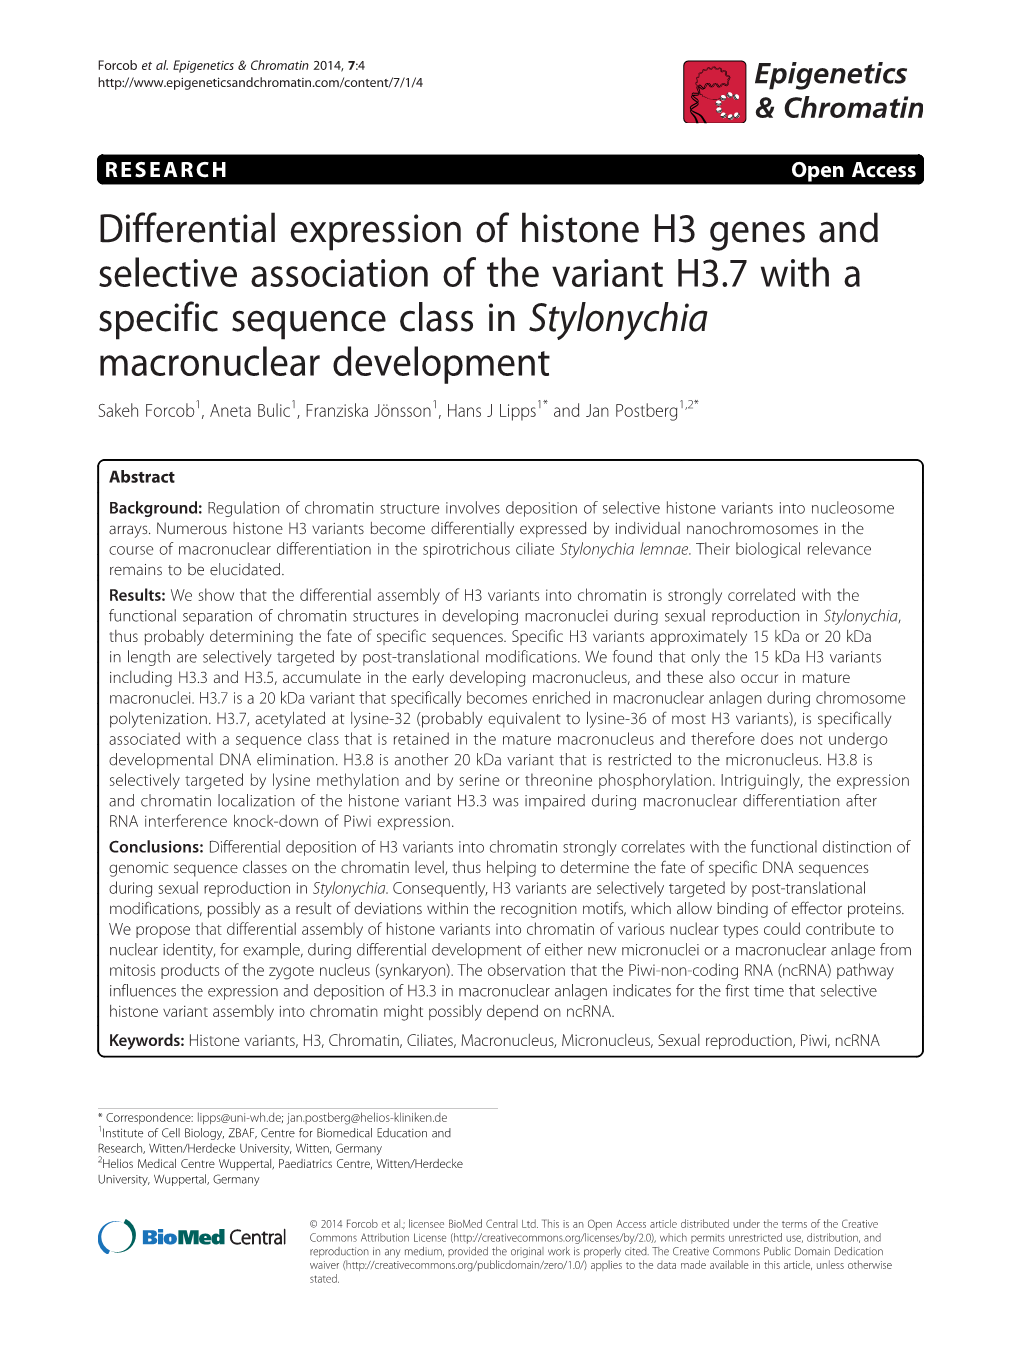 Differential Expression of Histone H3 Genes